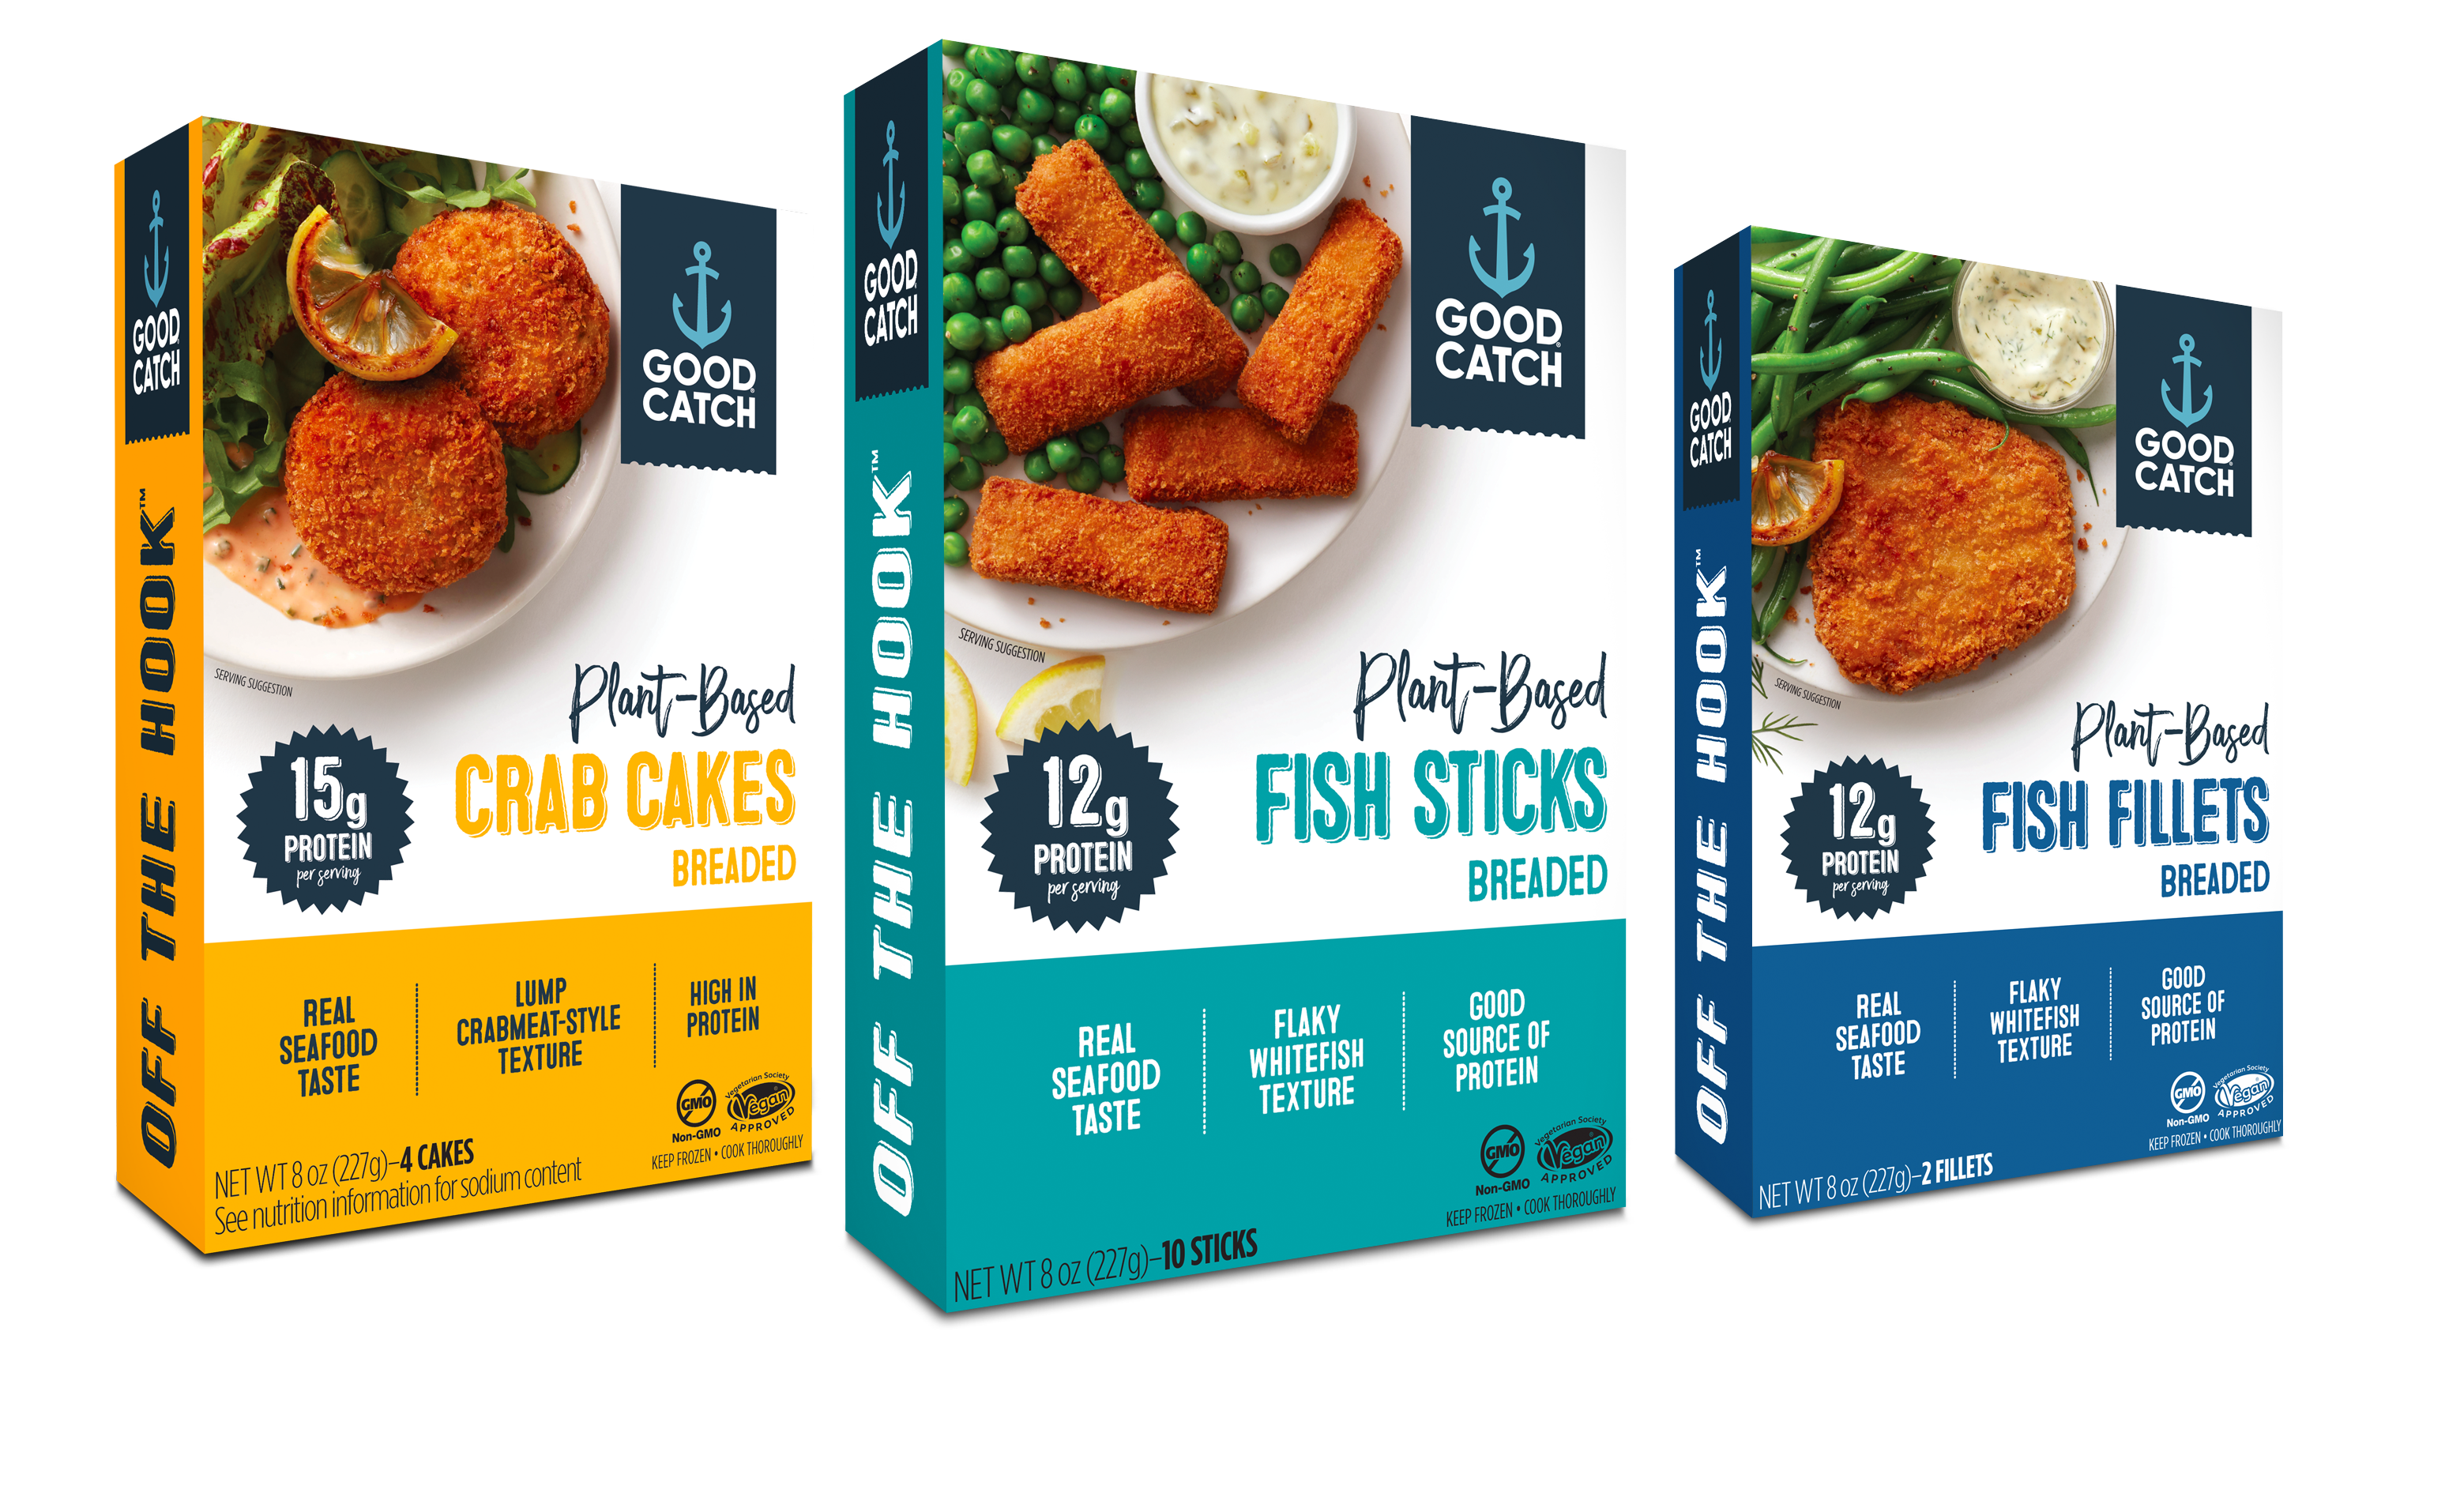 Good Catch Innovative Plant-Based Breaded Seafood Line Launches